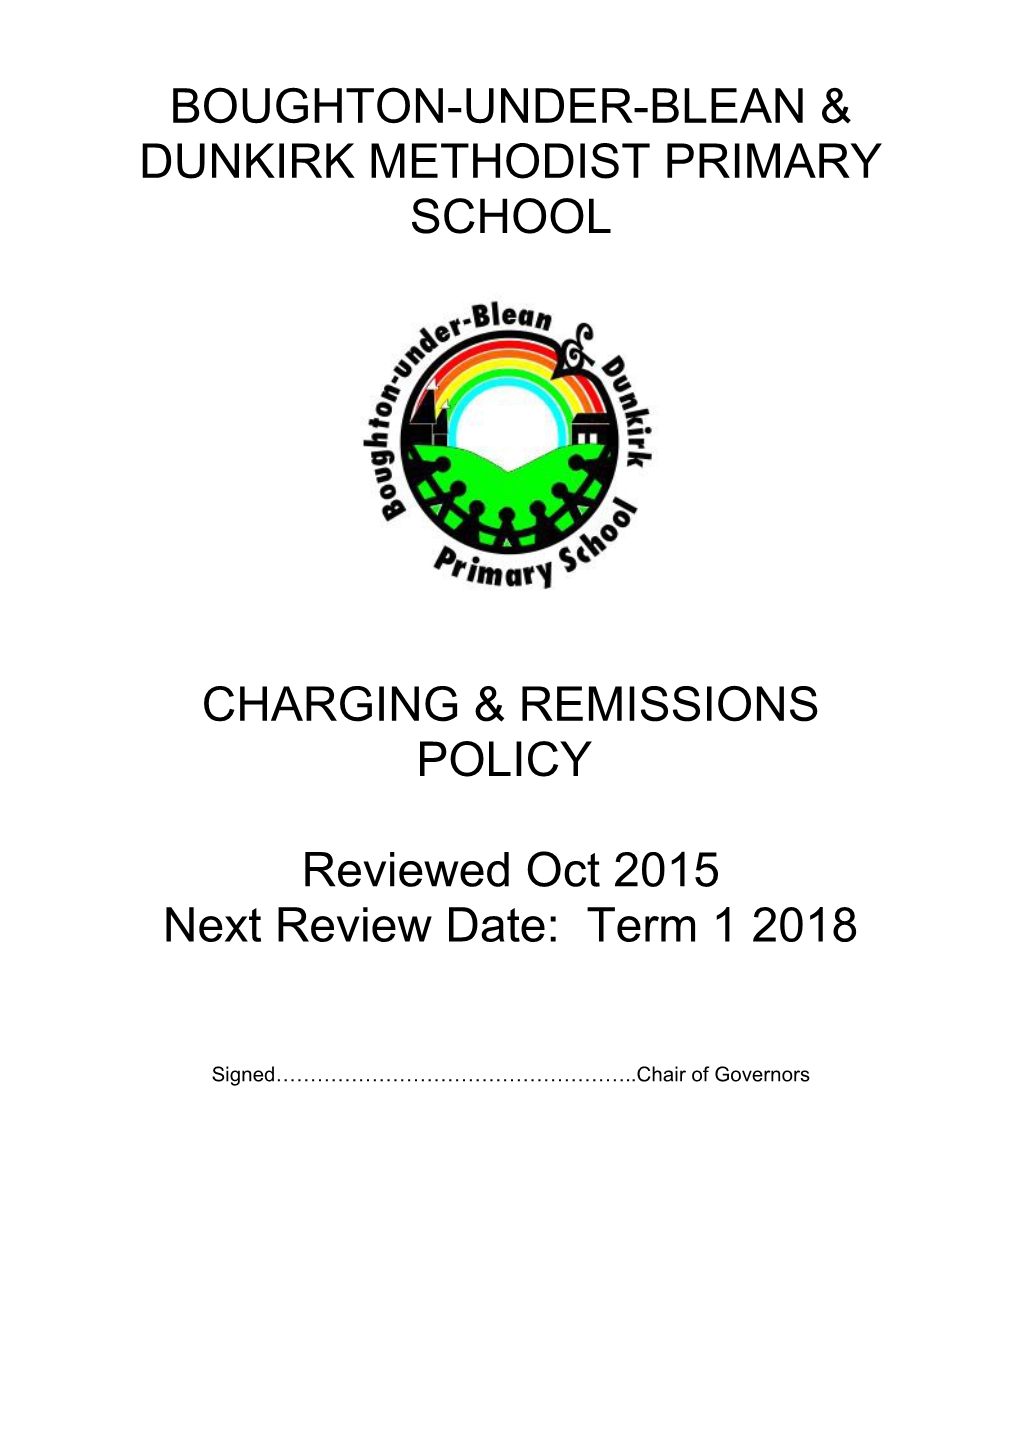 Charging and Remissions